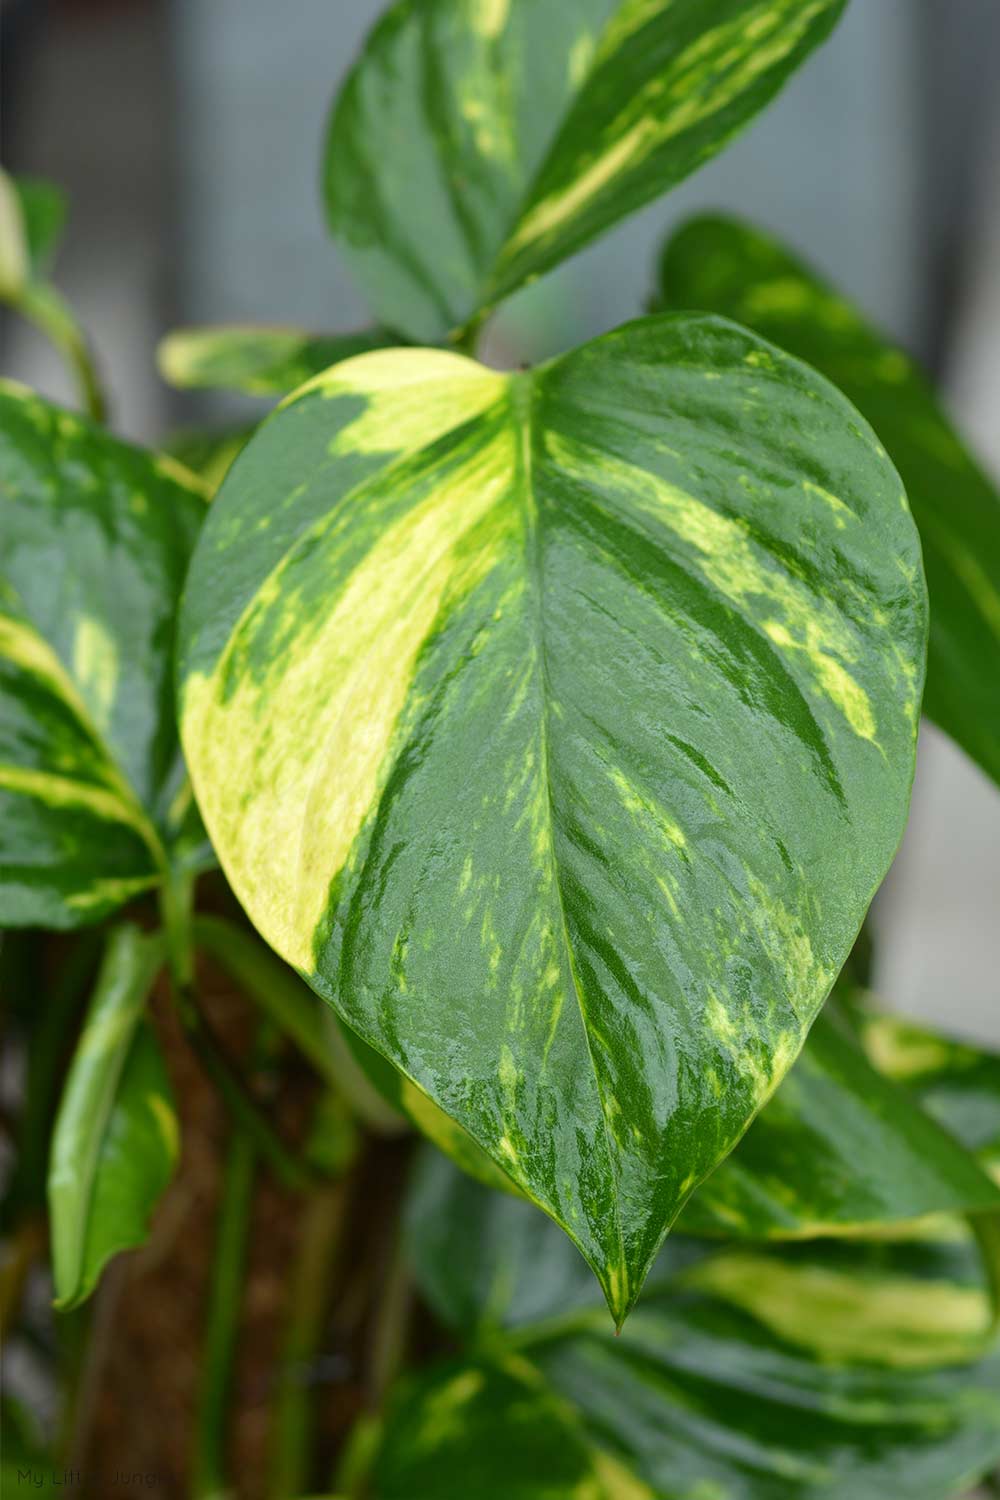 Golden Pothos Leaf - one of the most popular types of pothos